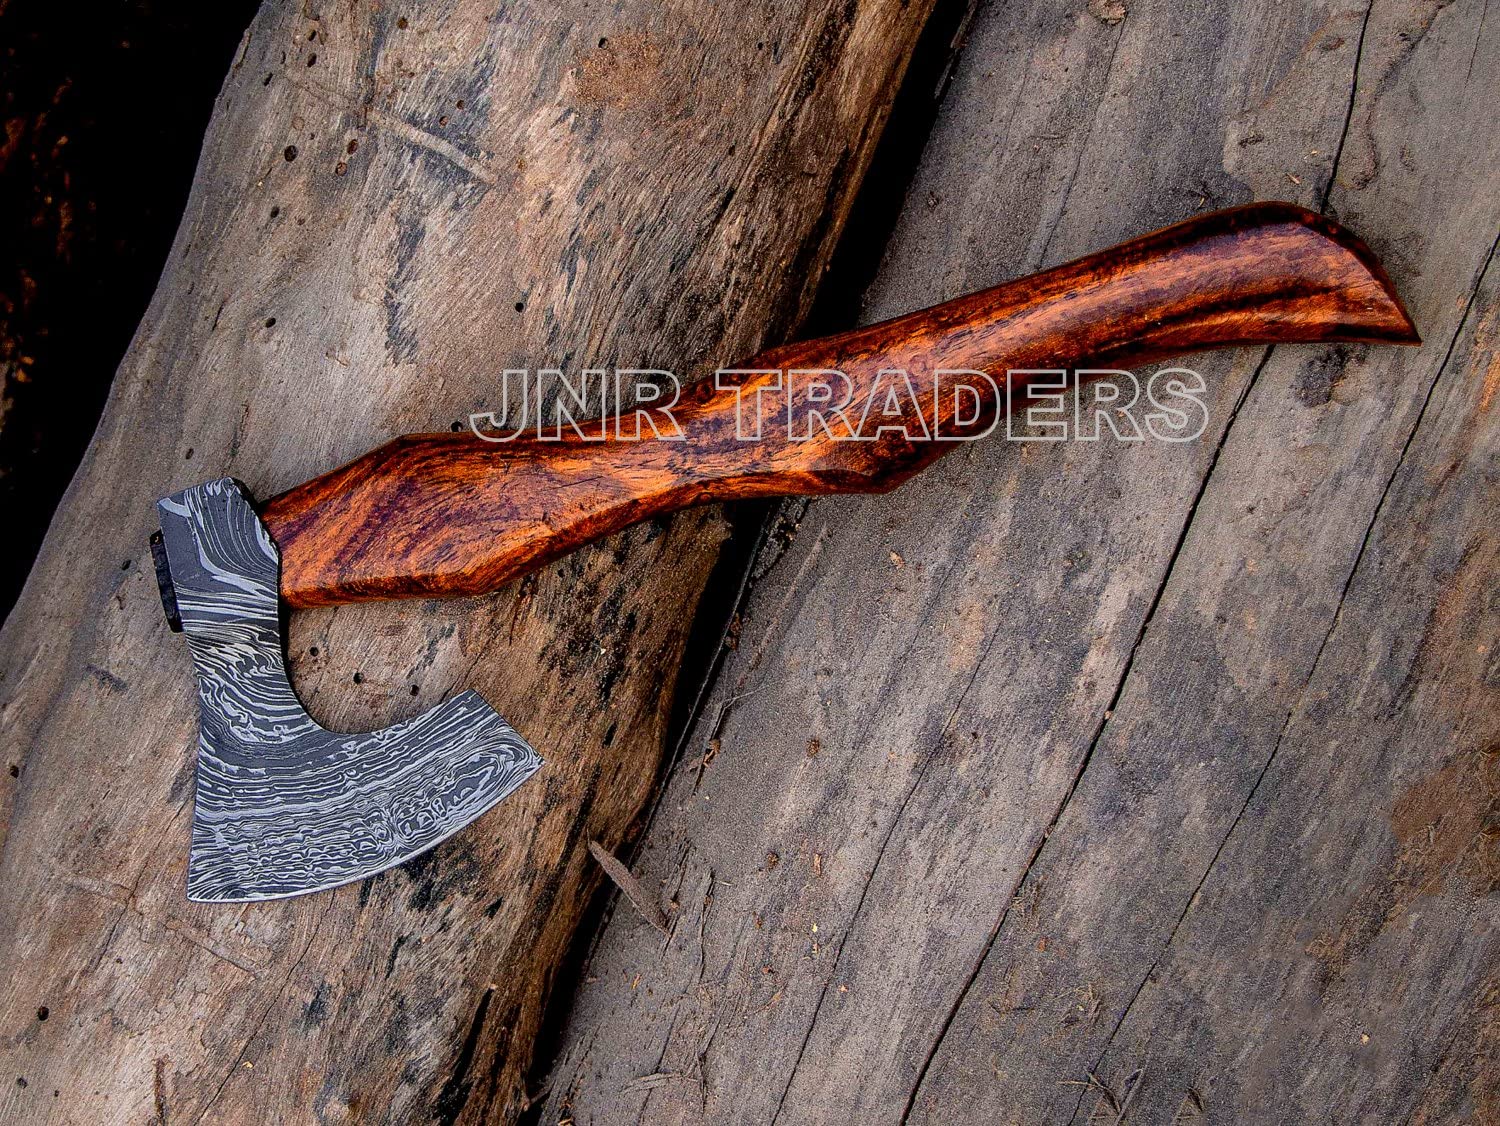  JNR Traders Damascus Steel Axe with Sheath, 16 Handmade  Damascus Camping Hatchet, Tomahawk Axe, Throwing Axe, Axe for Wood Cutting  Splitting 2217 : Sports & Outdoors